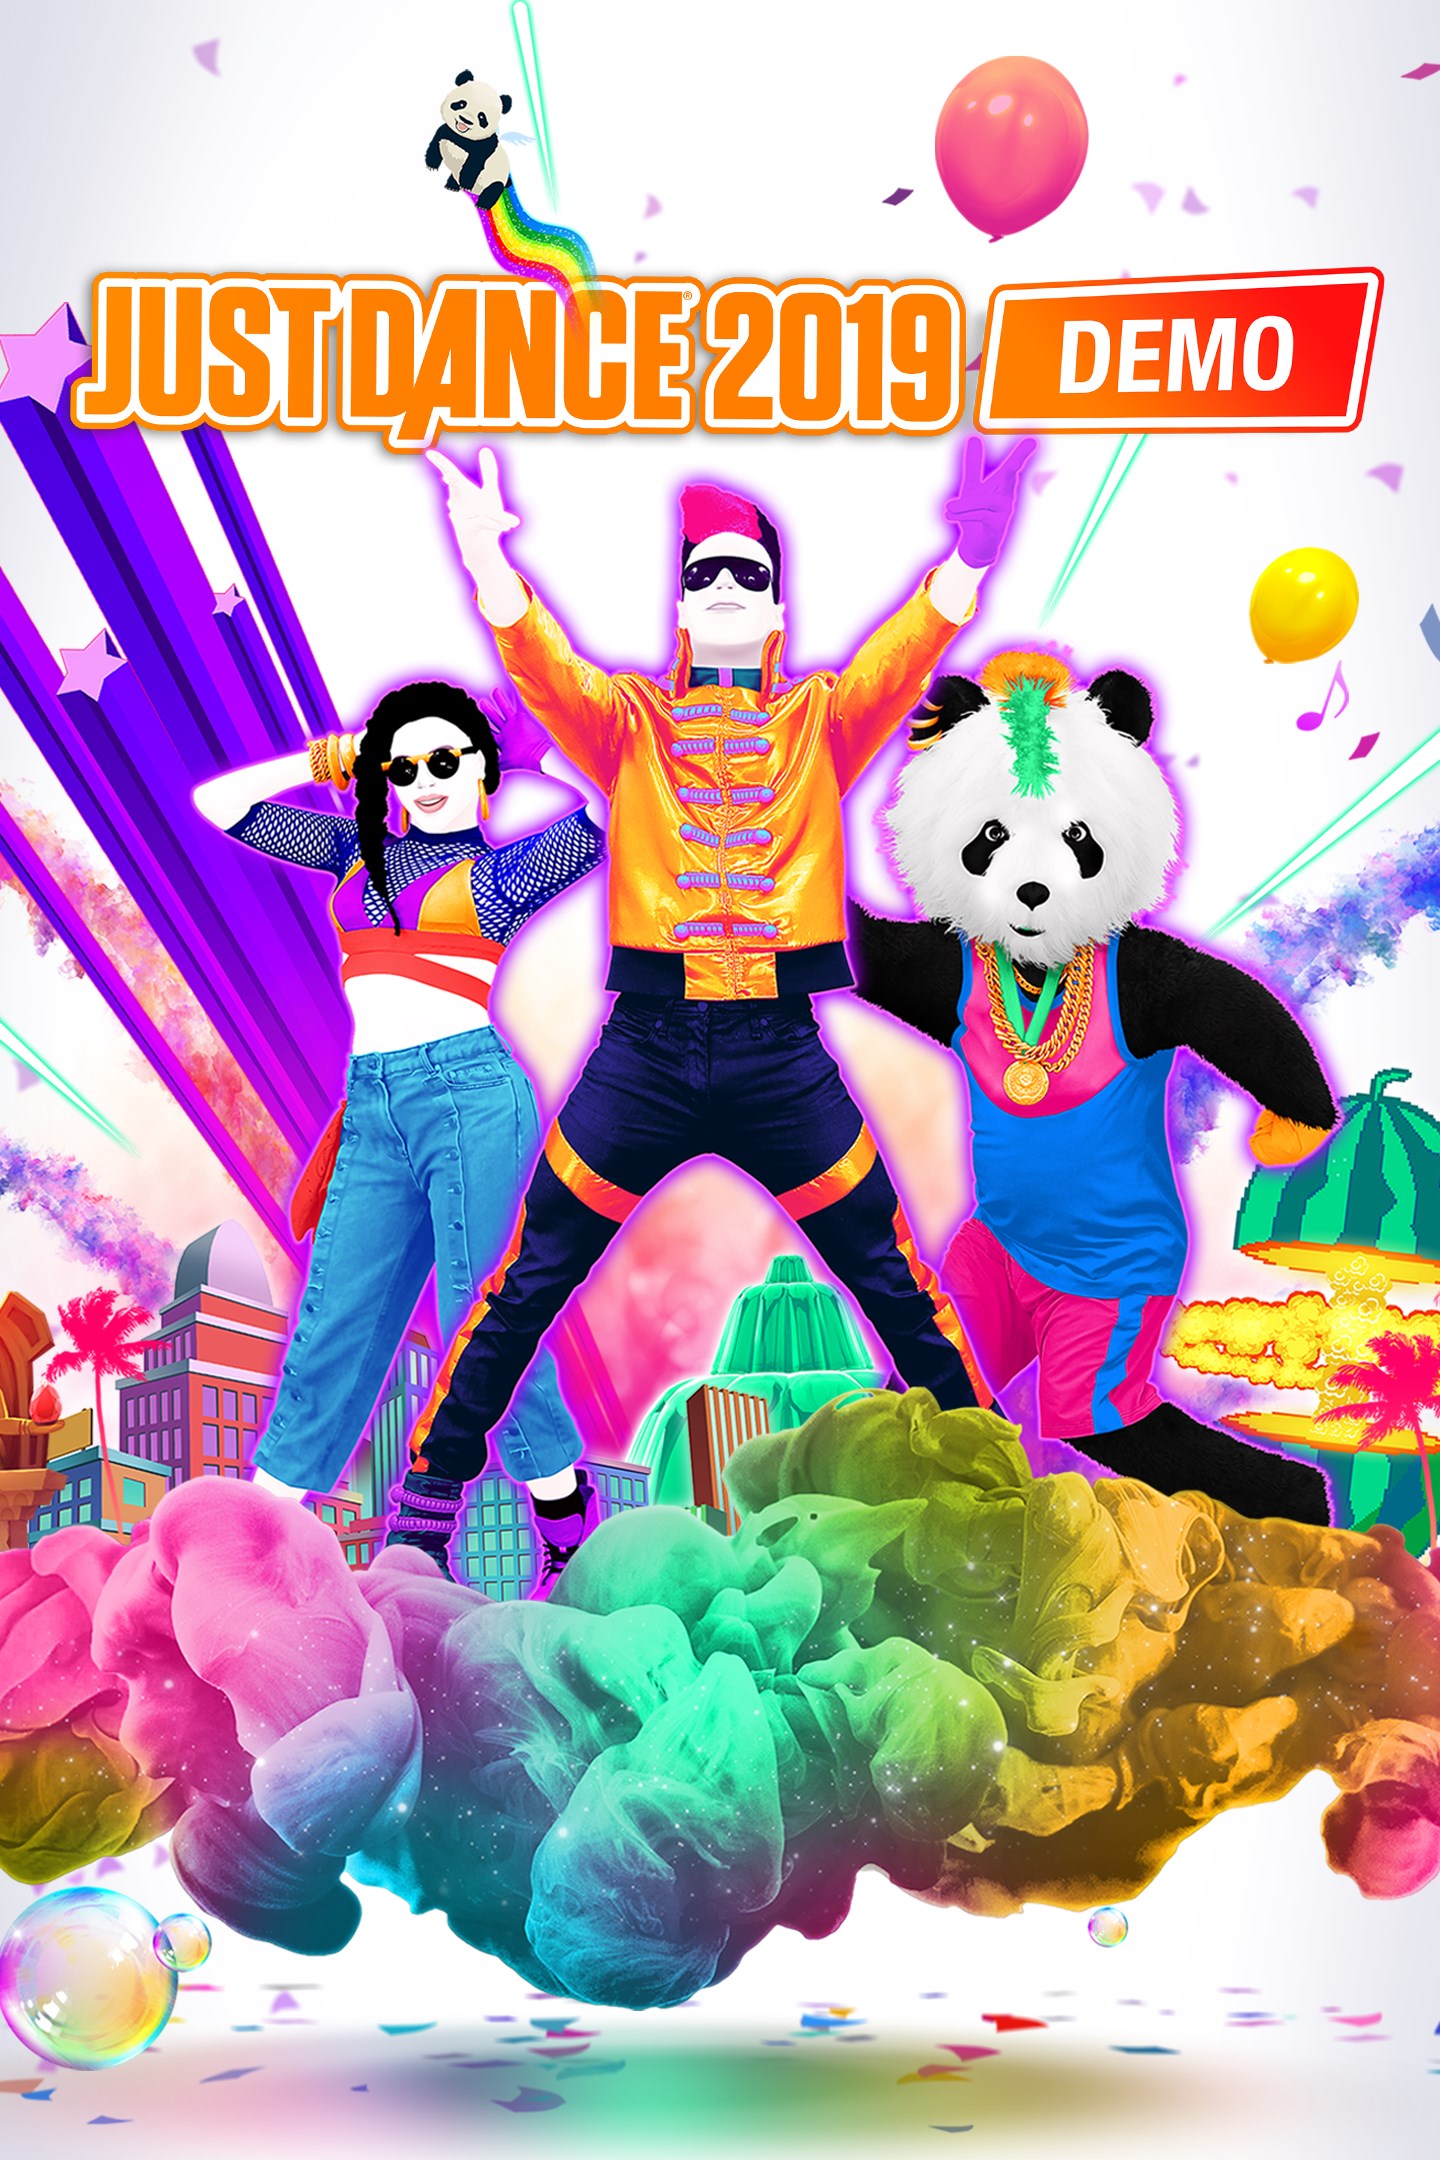 just dance 2019 for xbox one